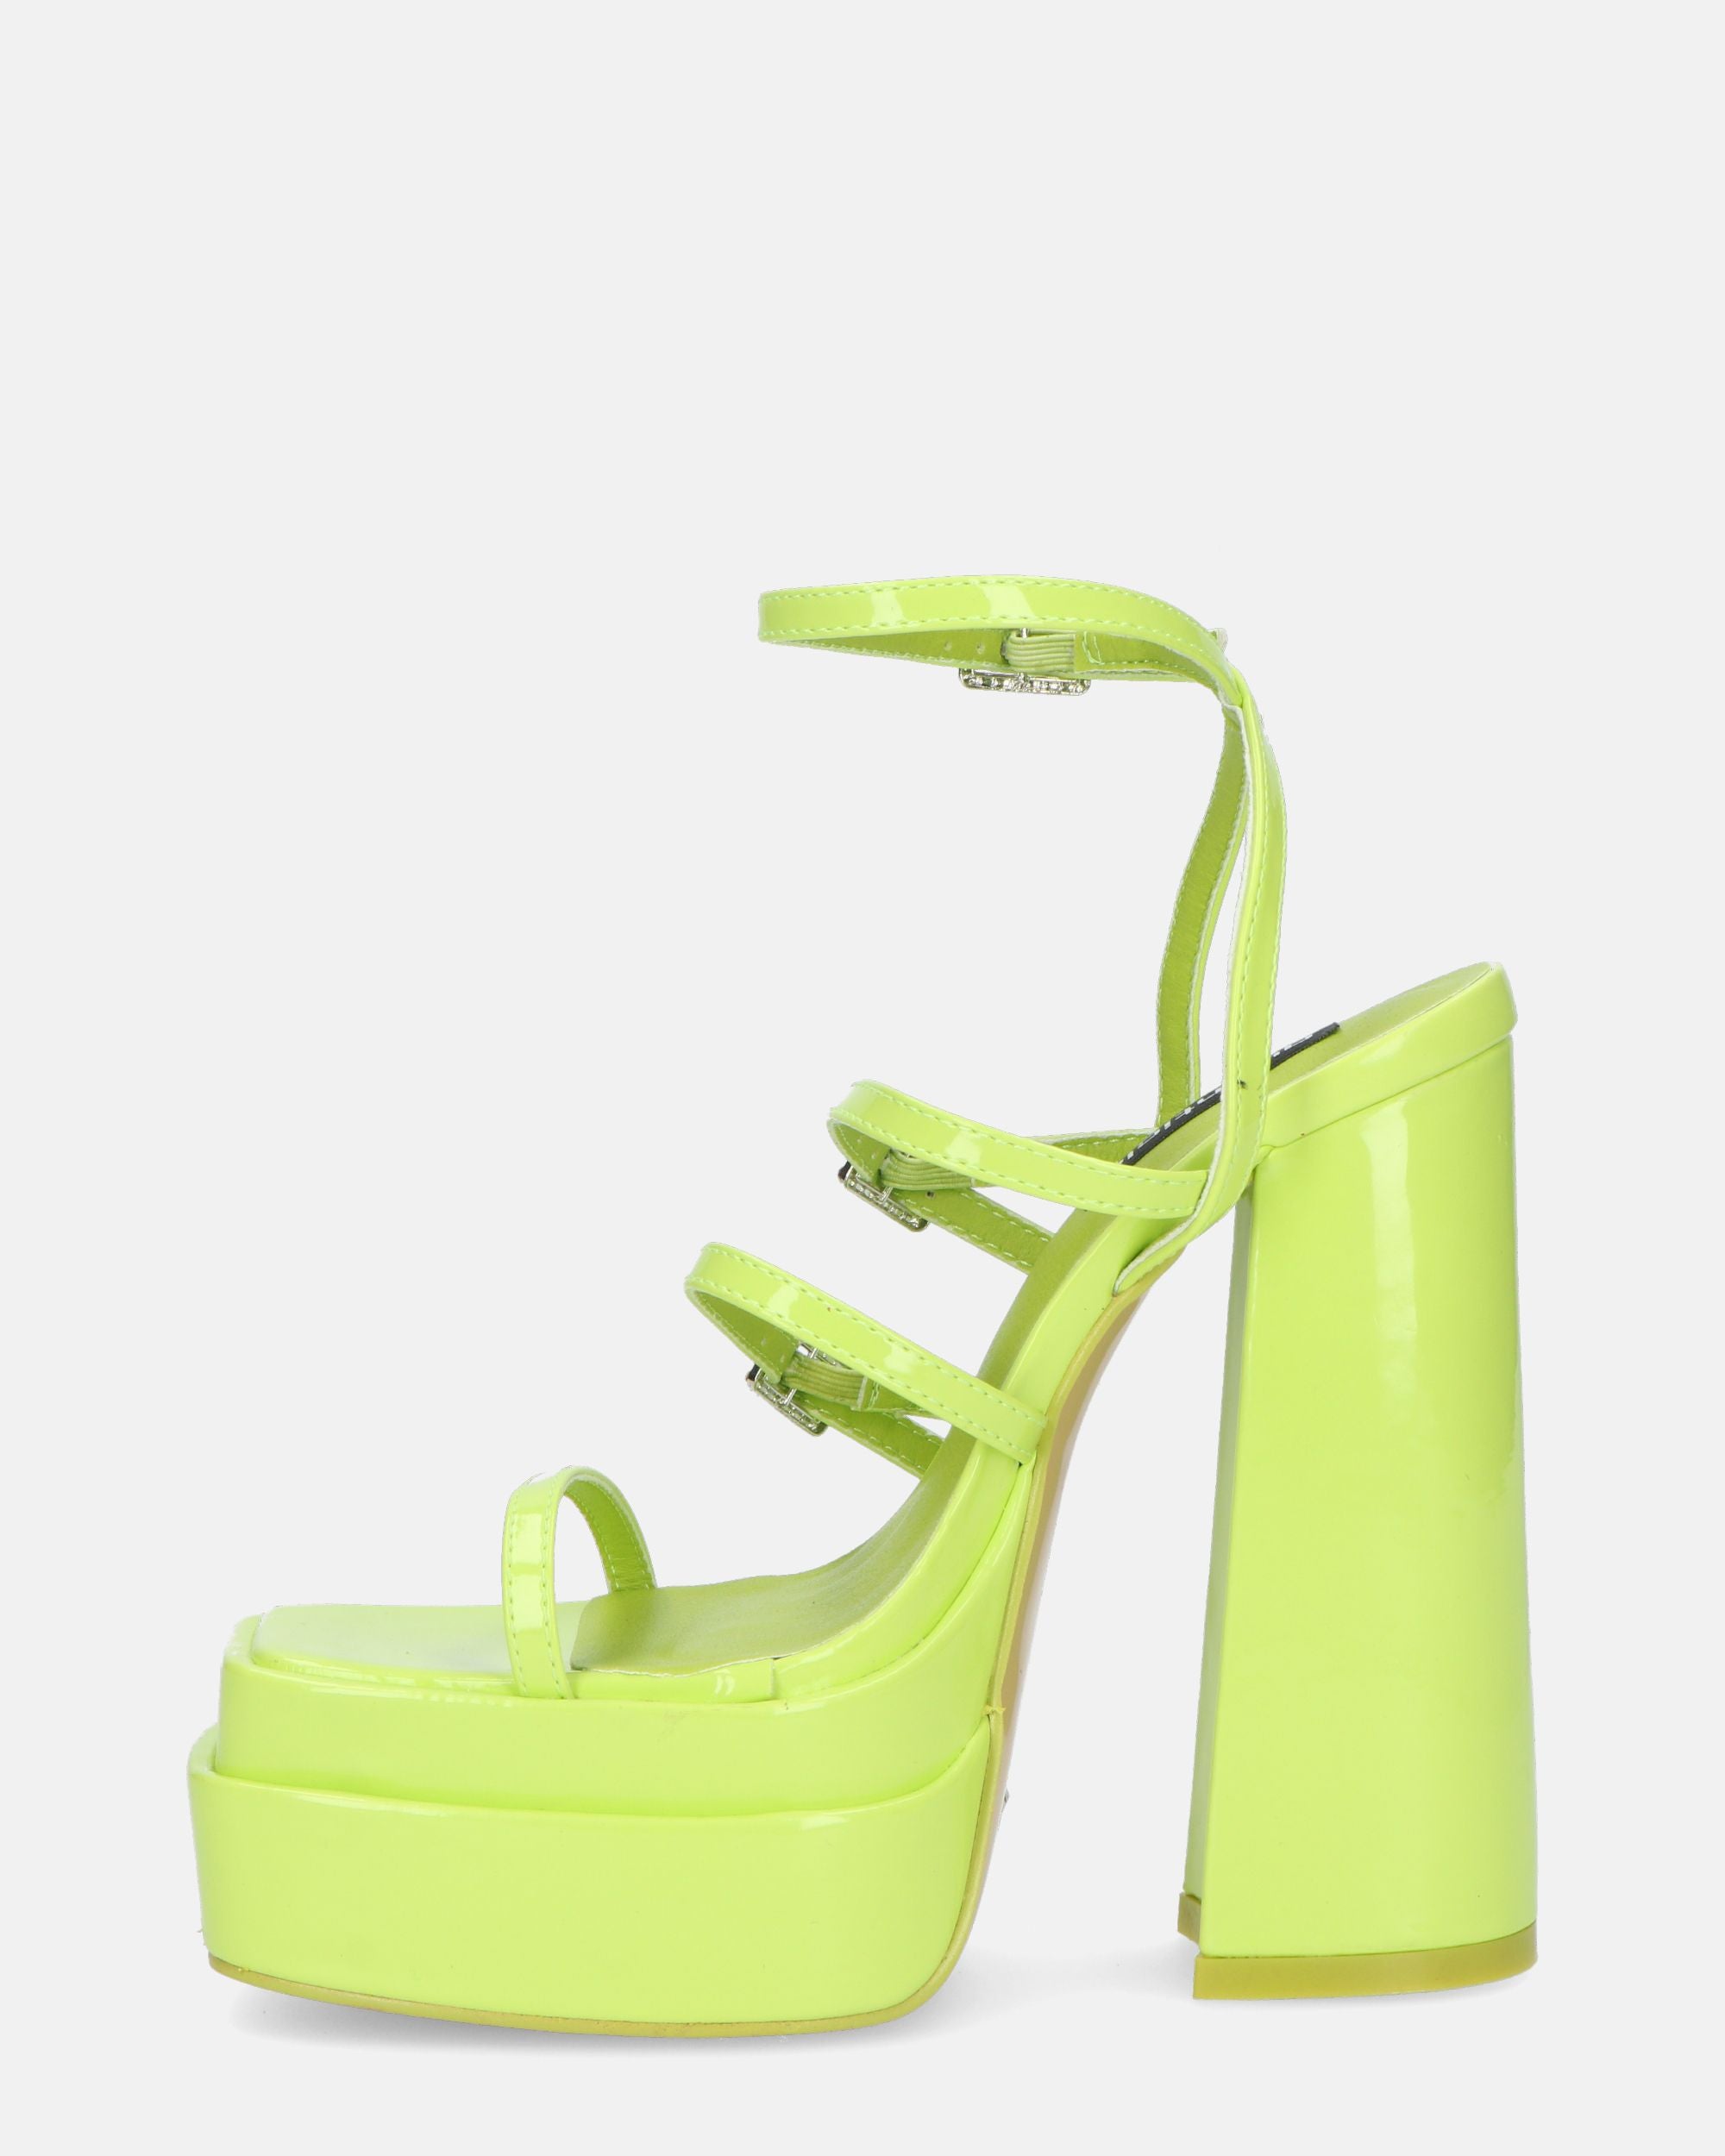 TEXA - sandals with strap and high heel in apple green